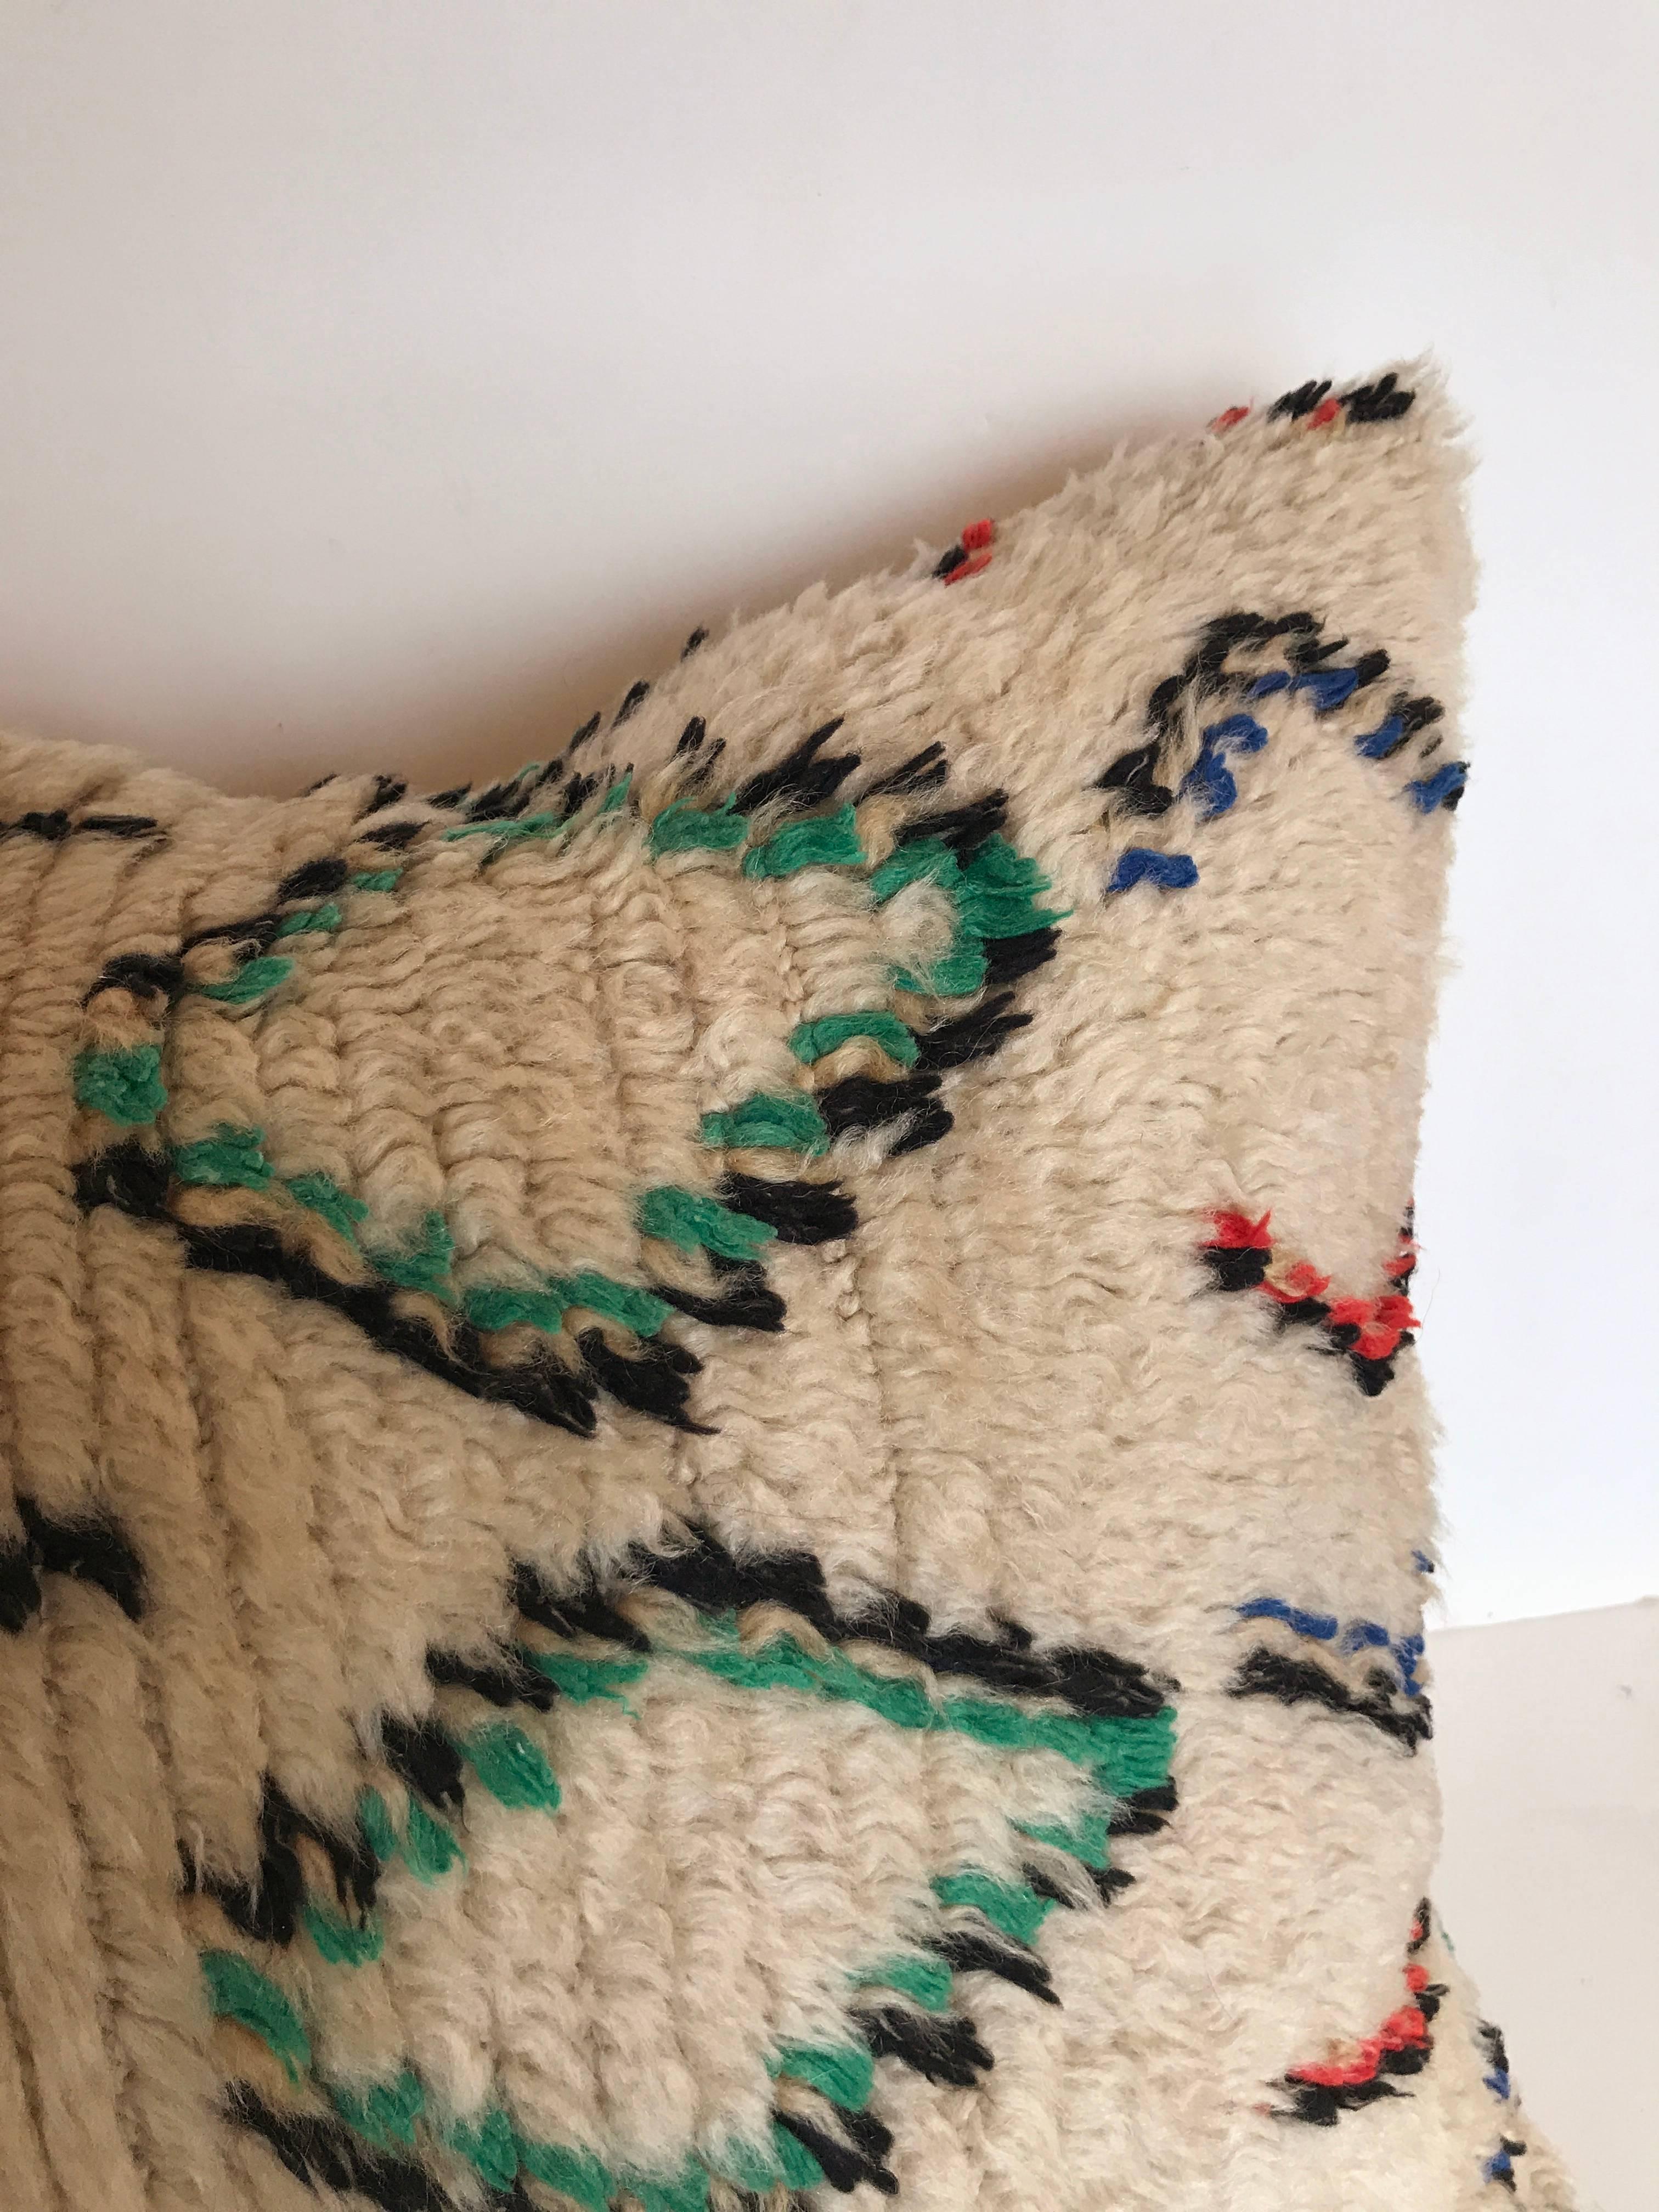 20th Century Custom Pillow Cut from a Vintage Hand Loomed Wool Moroccan Beni Ouarain Rug